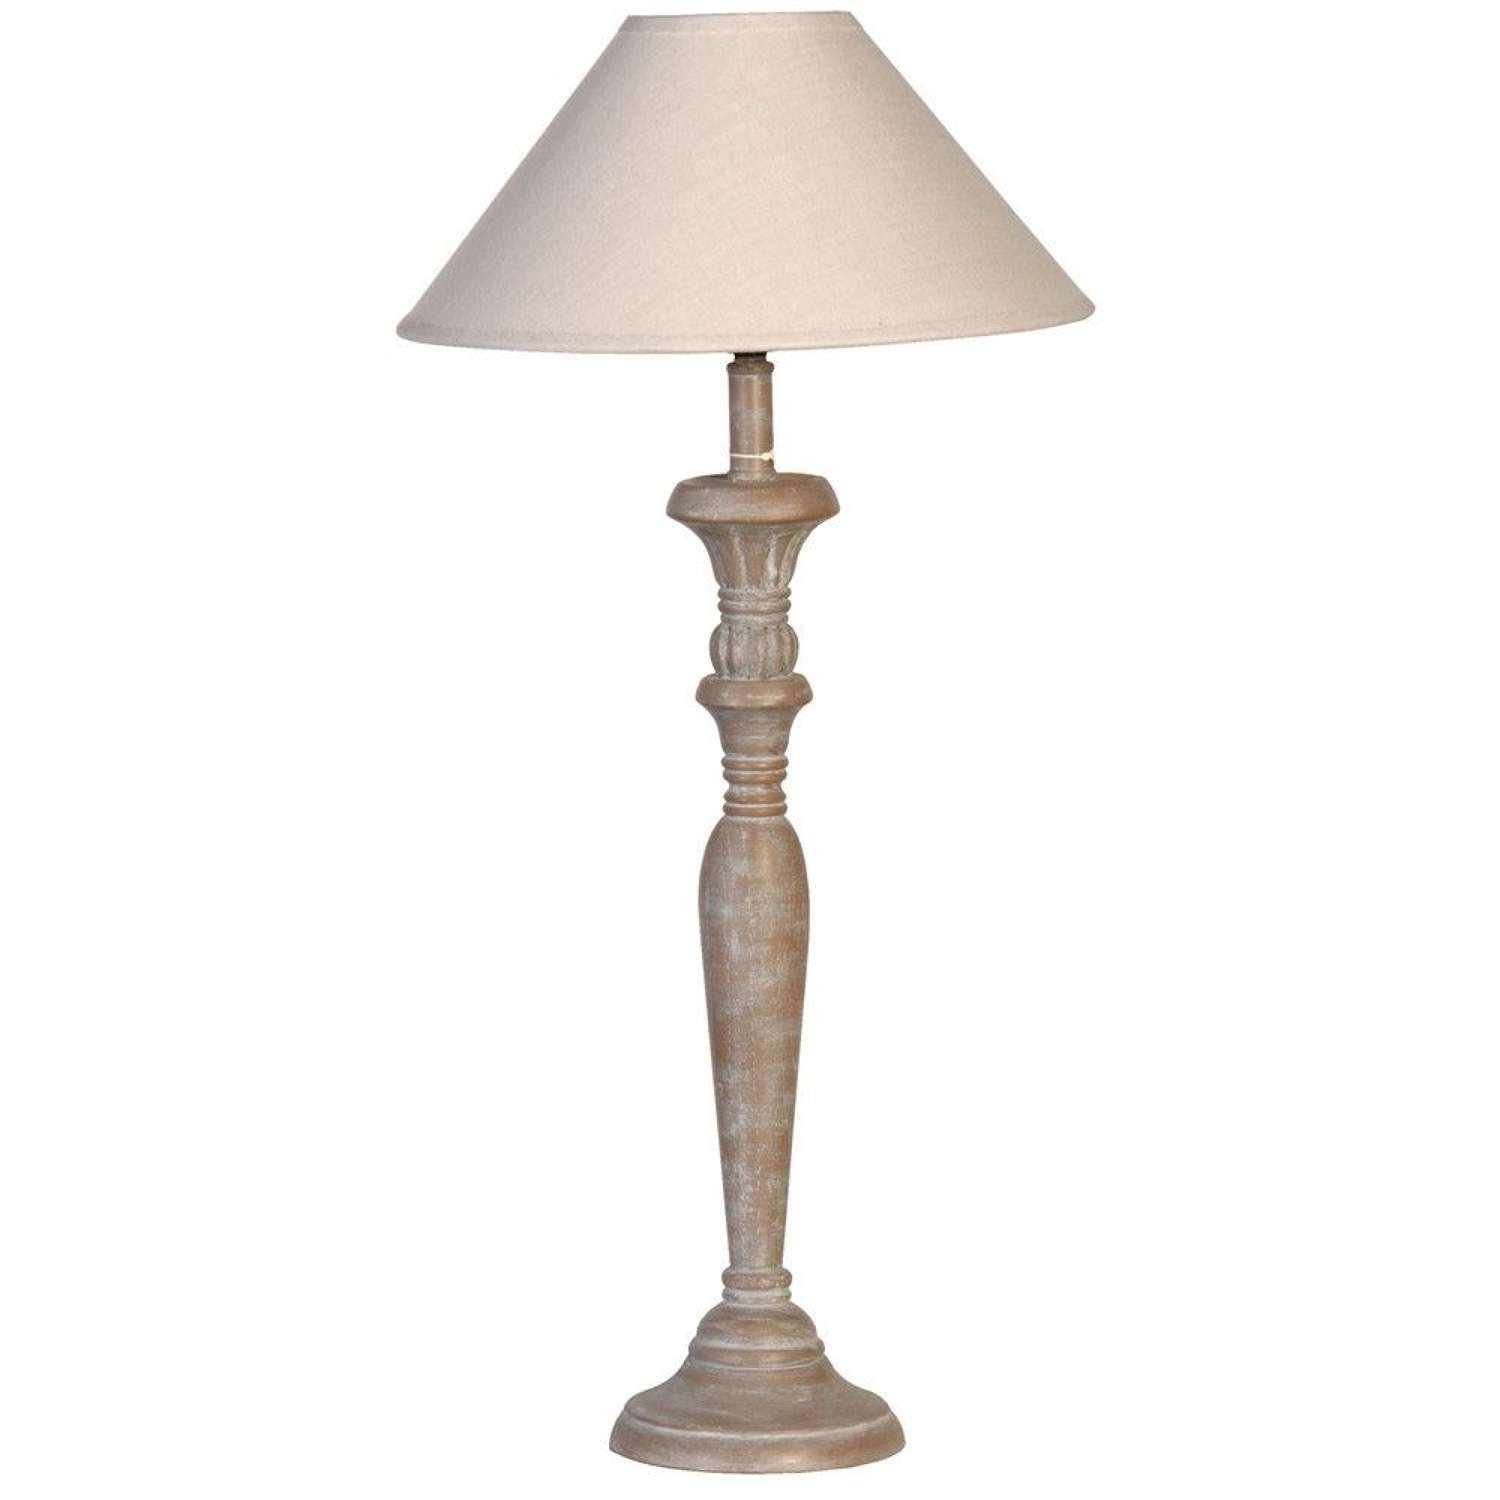 Grey Wash Candlestick Lamp with Shade